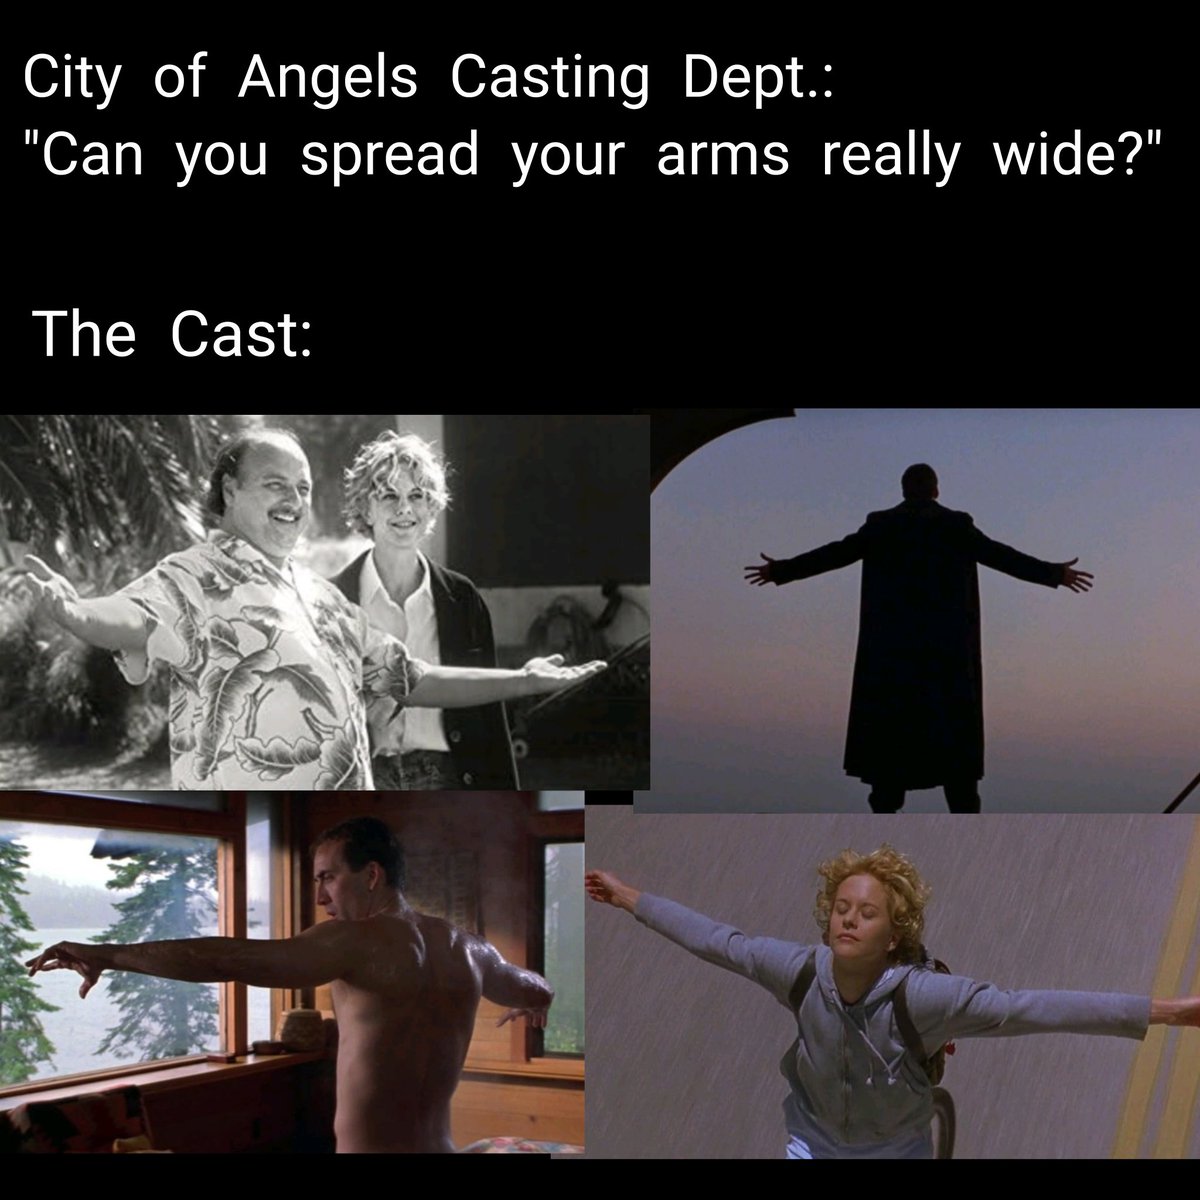 It's #newpodcast day! Our first #Meguary movie is upon us as we discuss the romantic classic #CityOfAngels. Download now anywhere Pods are cast!

#podcast #movies #nostalgia #MegRyan #NicolasCage #DennisFranz #AndreBraugher #ColmFeore #RobinBartlett #JoannaMerlin